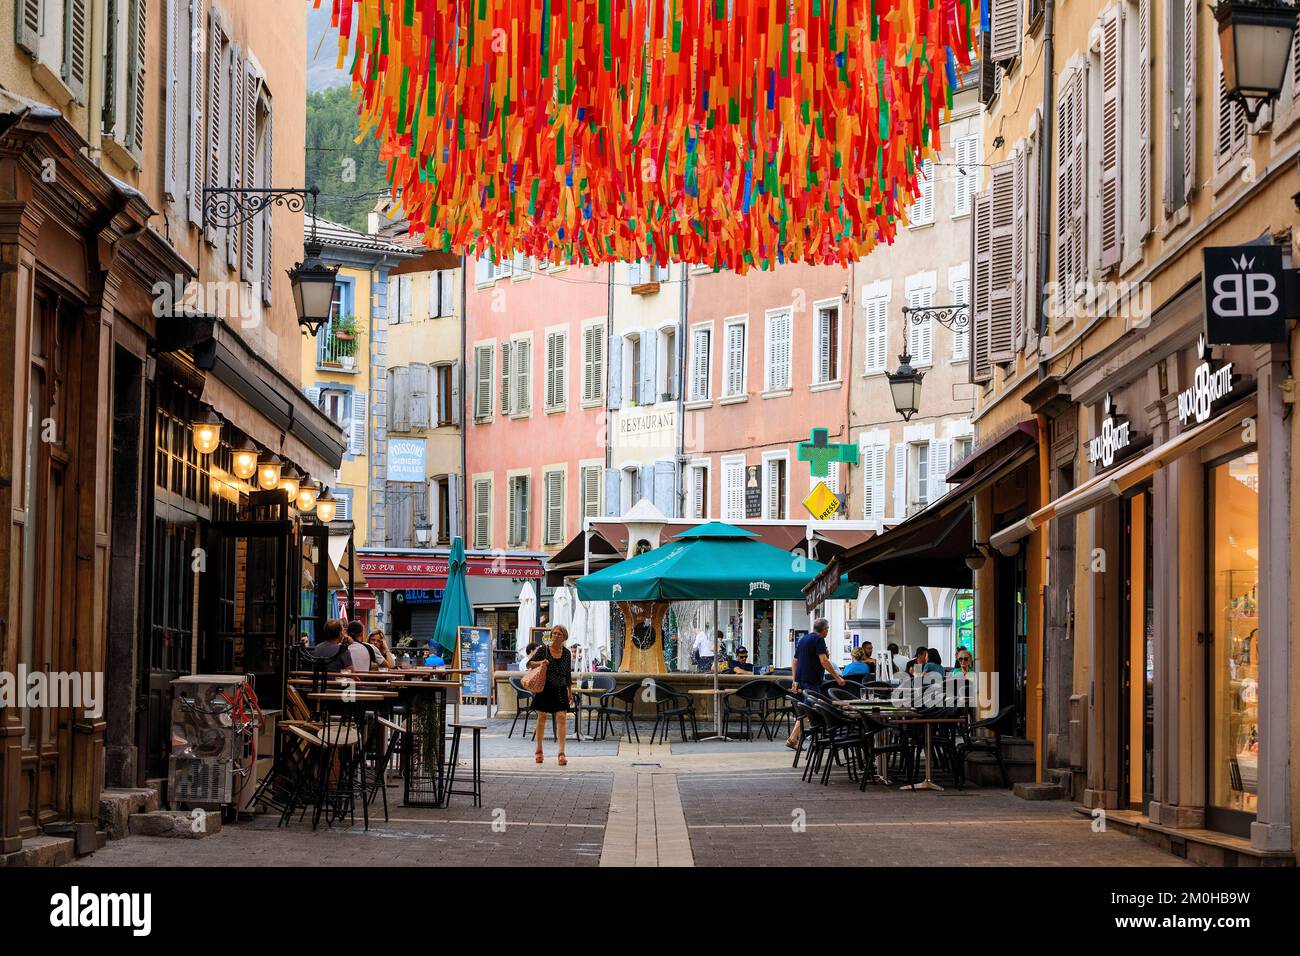 France, Hautes Alpes, Gap, rue Elisee, place Jean Marcellin and fountain in the background Stock Photo